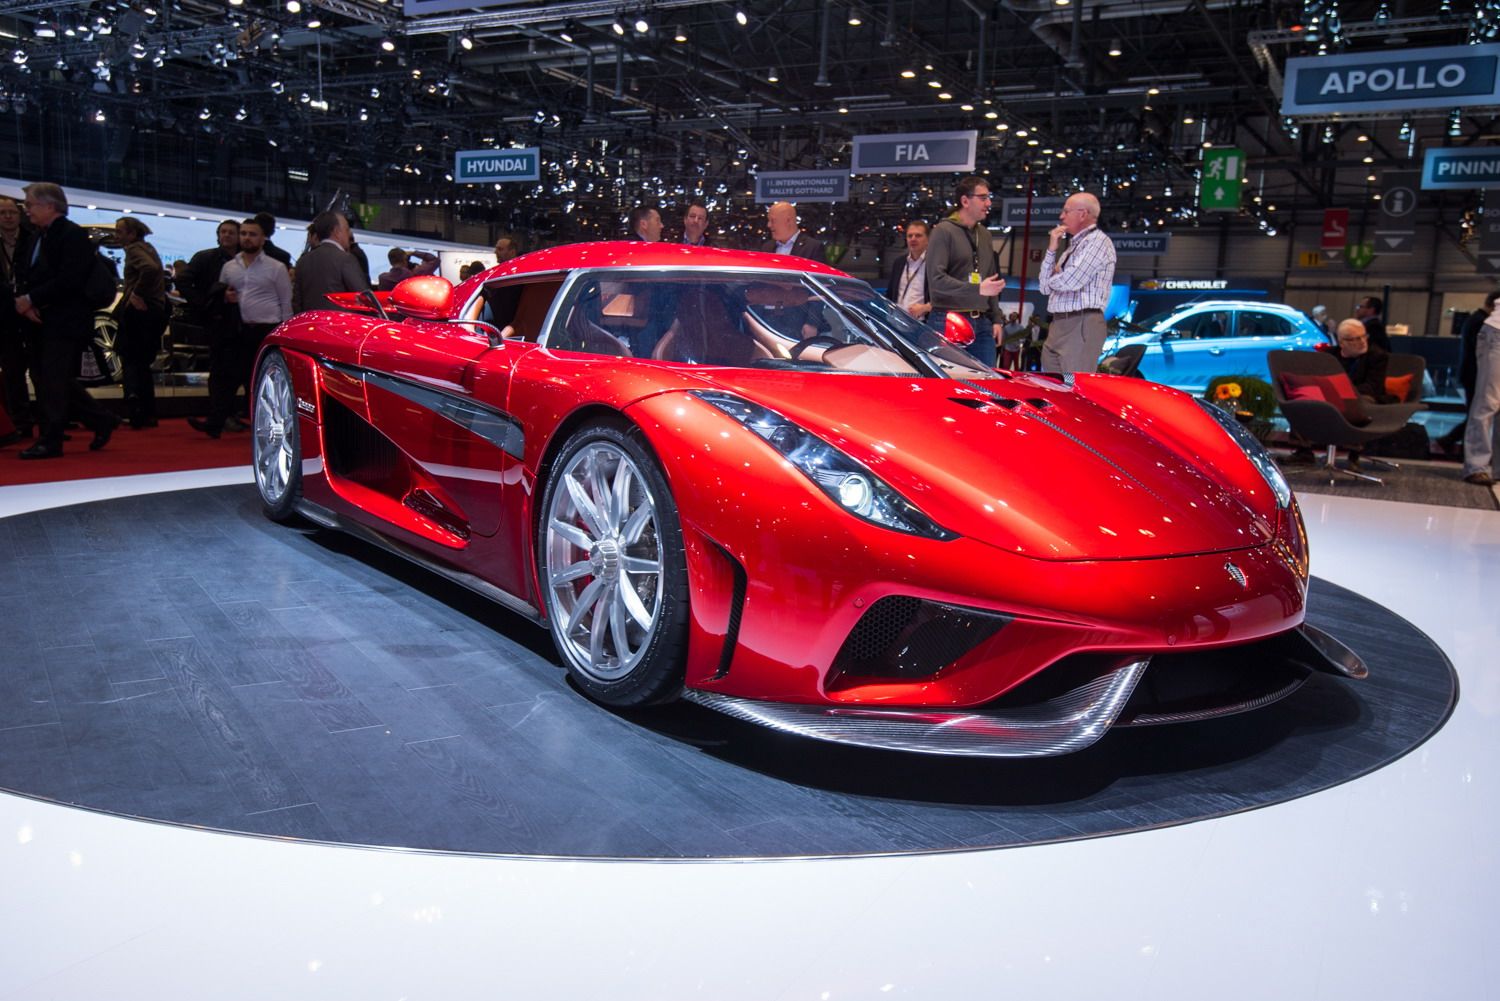 2019 Koenigsegg Exclusivity Will Drop as the Brand Aims to Taken on Ferrari in the Next Decade